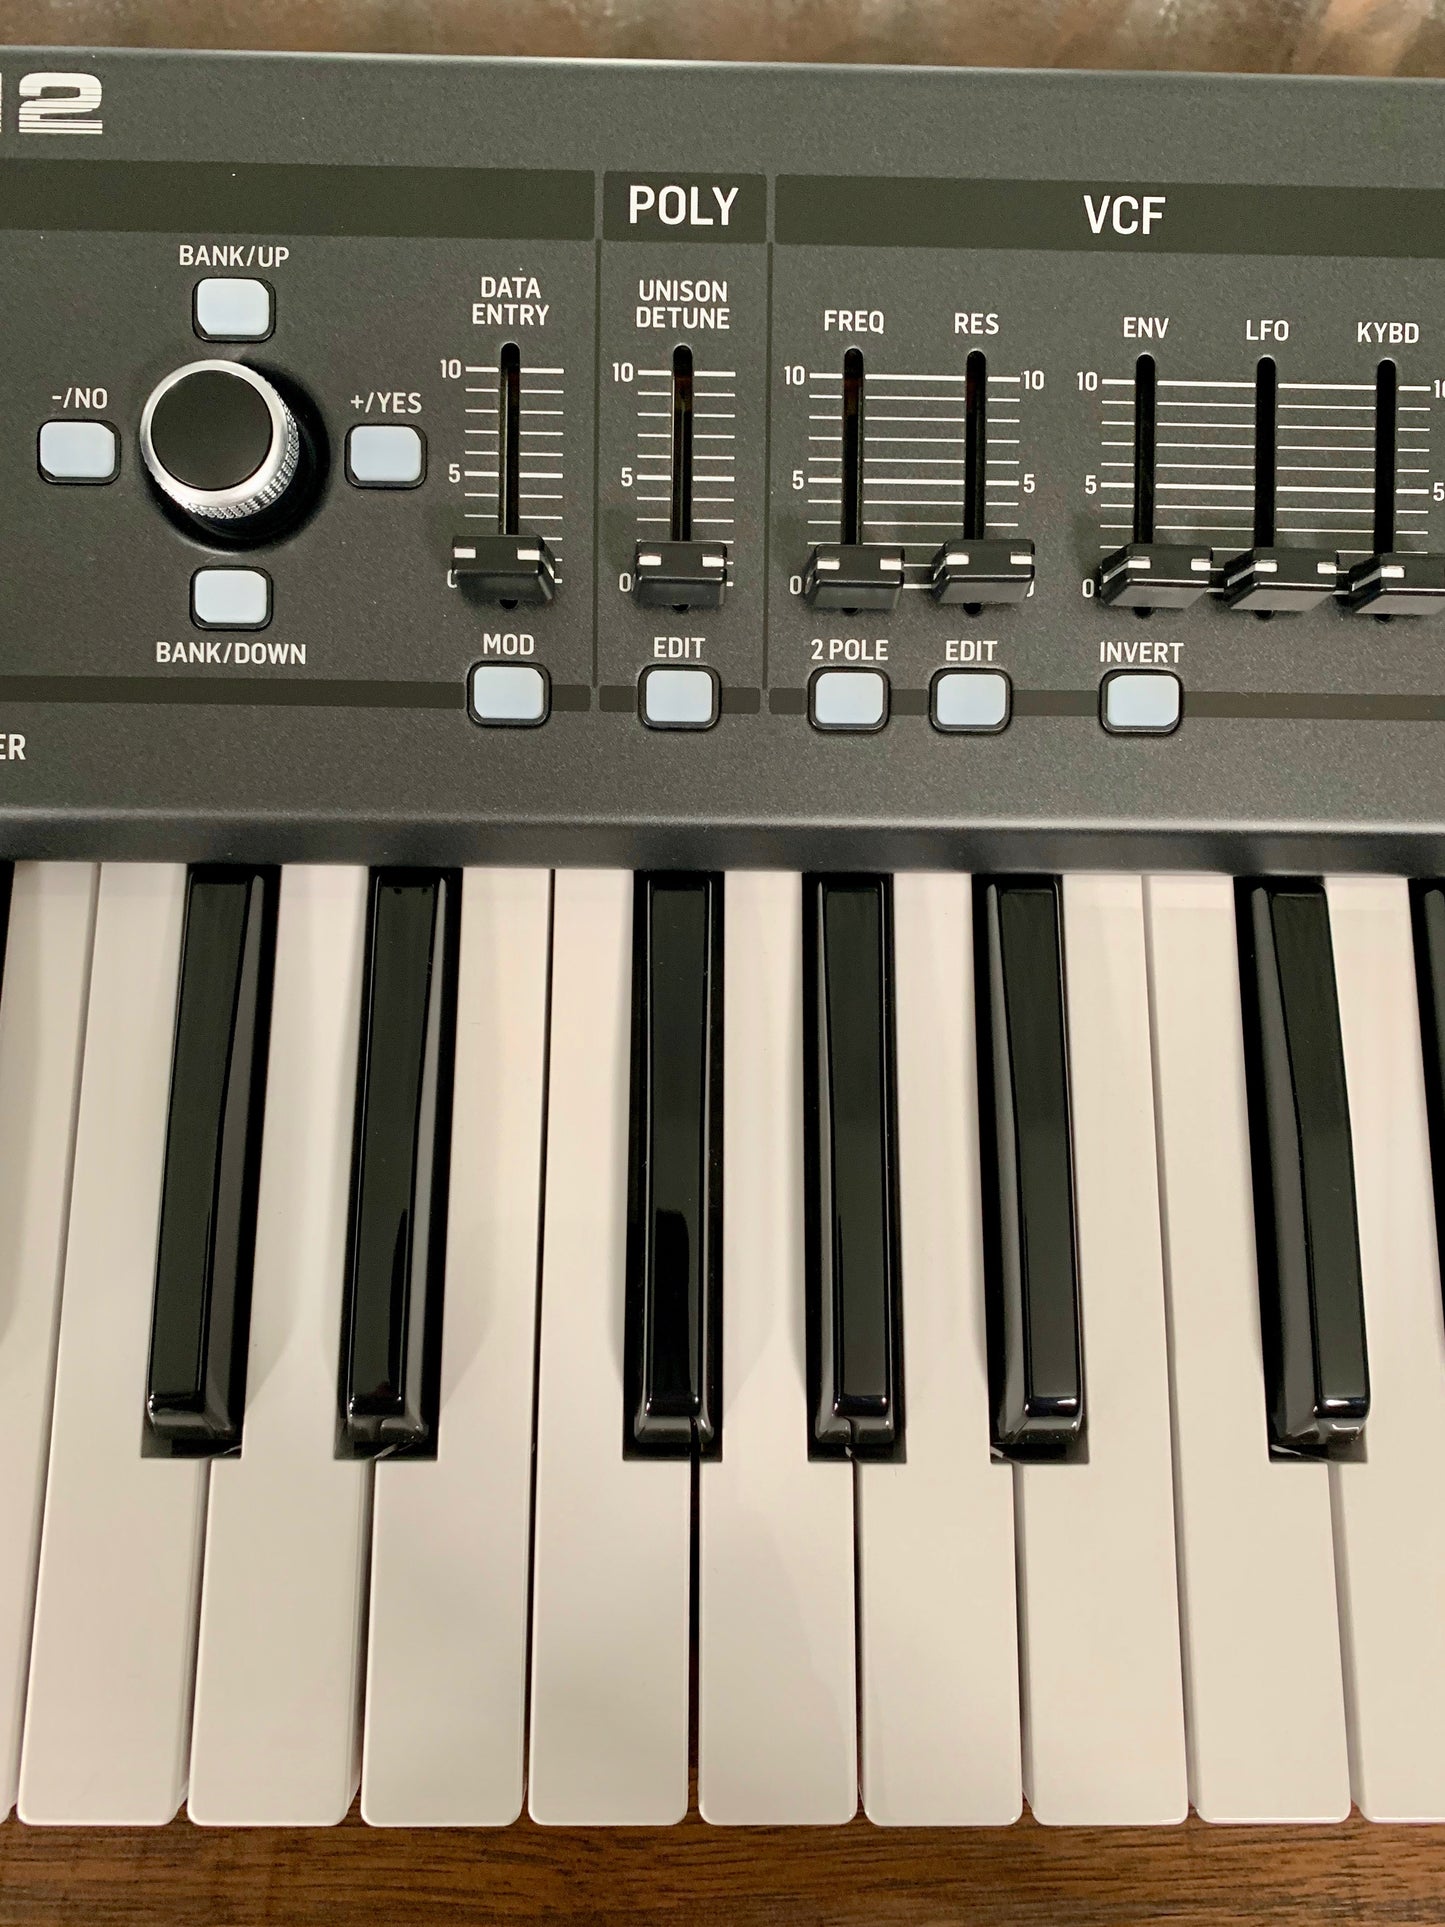 Behringer Deepmind 12 Voice Polyphonic Keyboard Synthesizer Demo